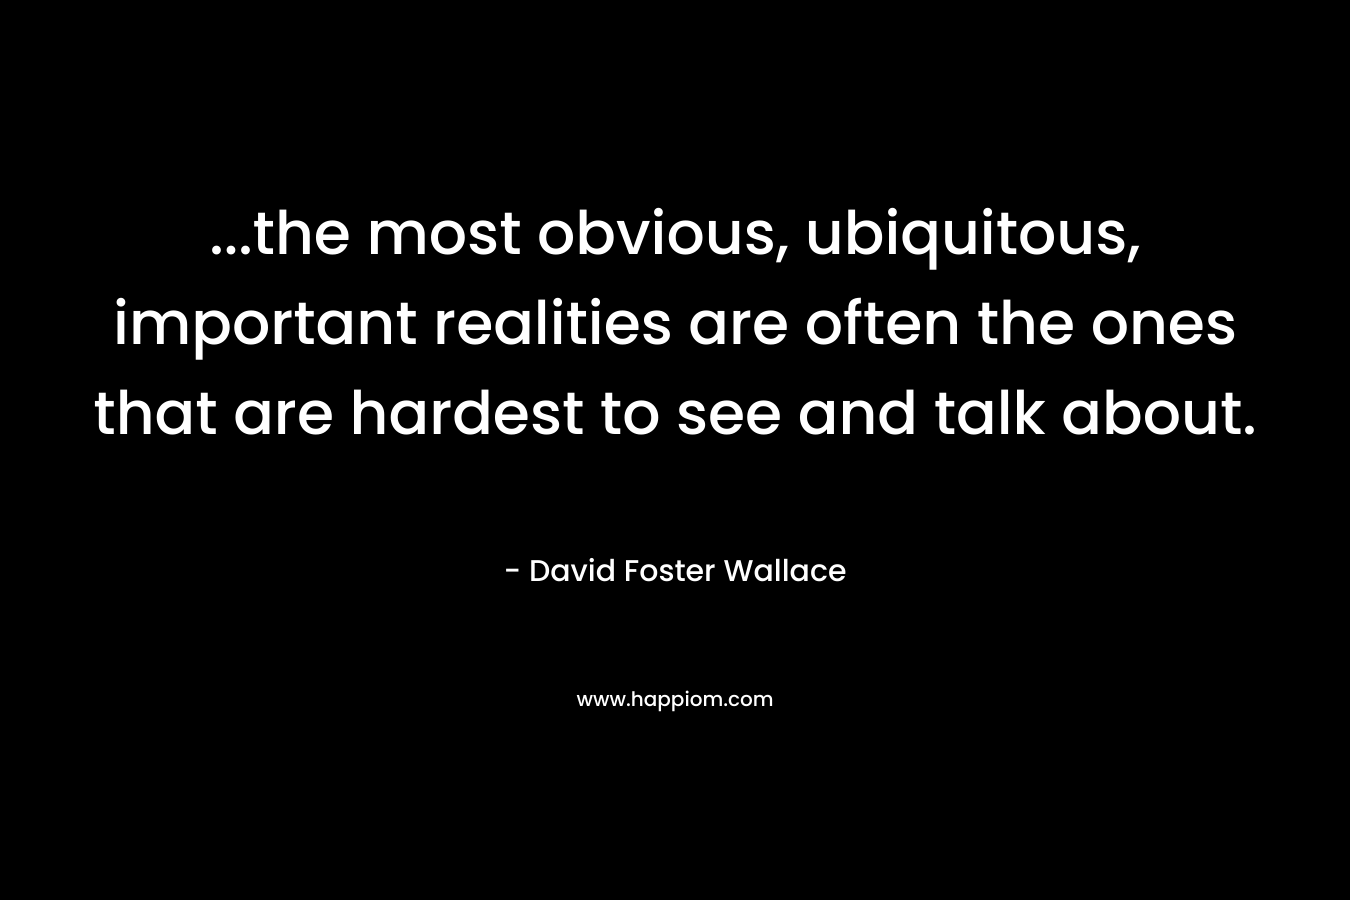 ...the most obvious, ubiquitous, important realities are often the ones that are hardest to see and talk about.